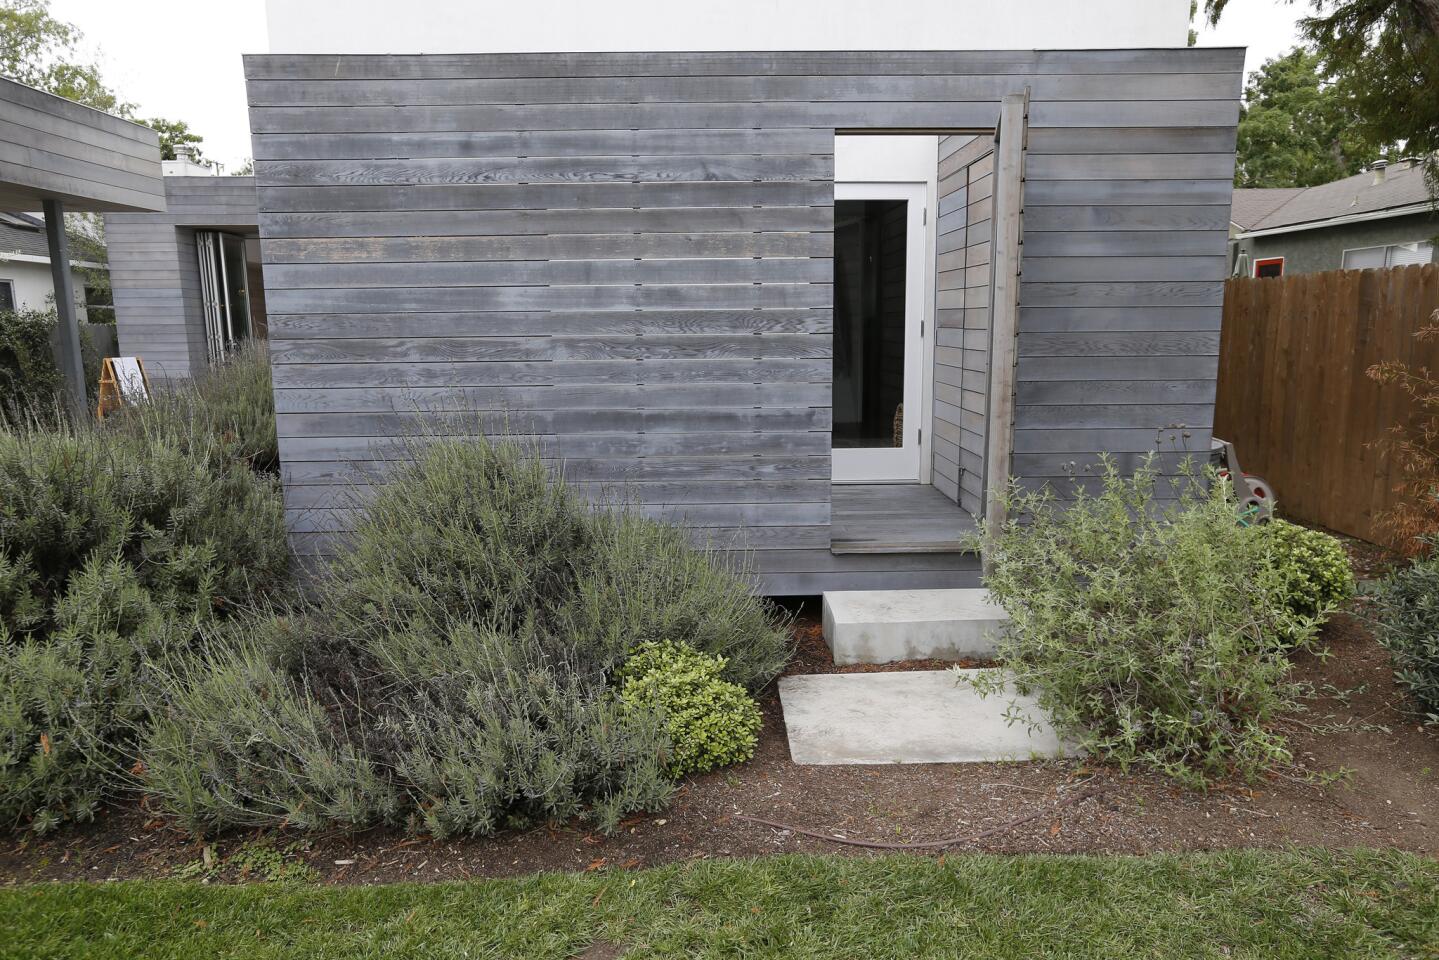 Culver City home creates community both indoors and out